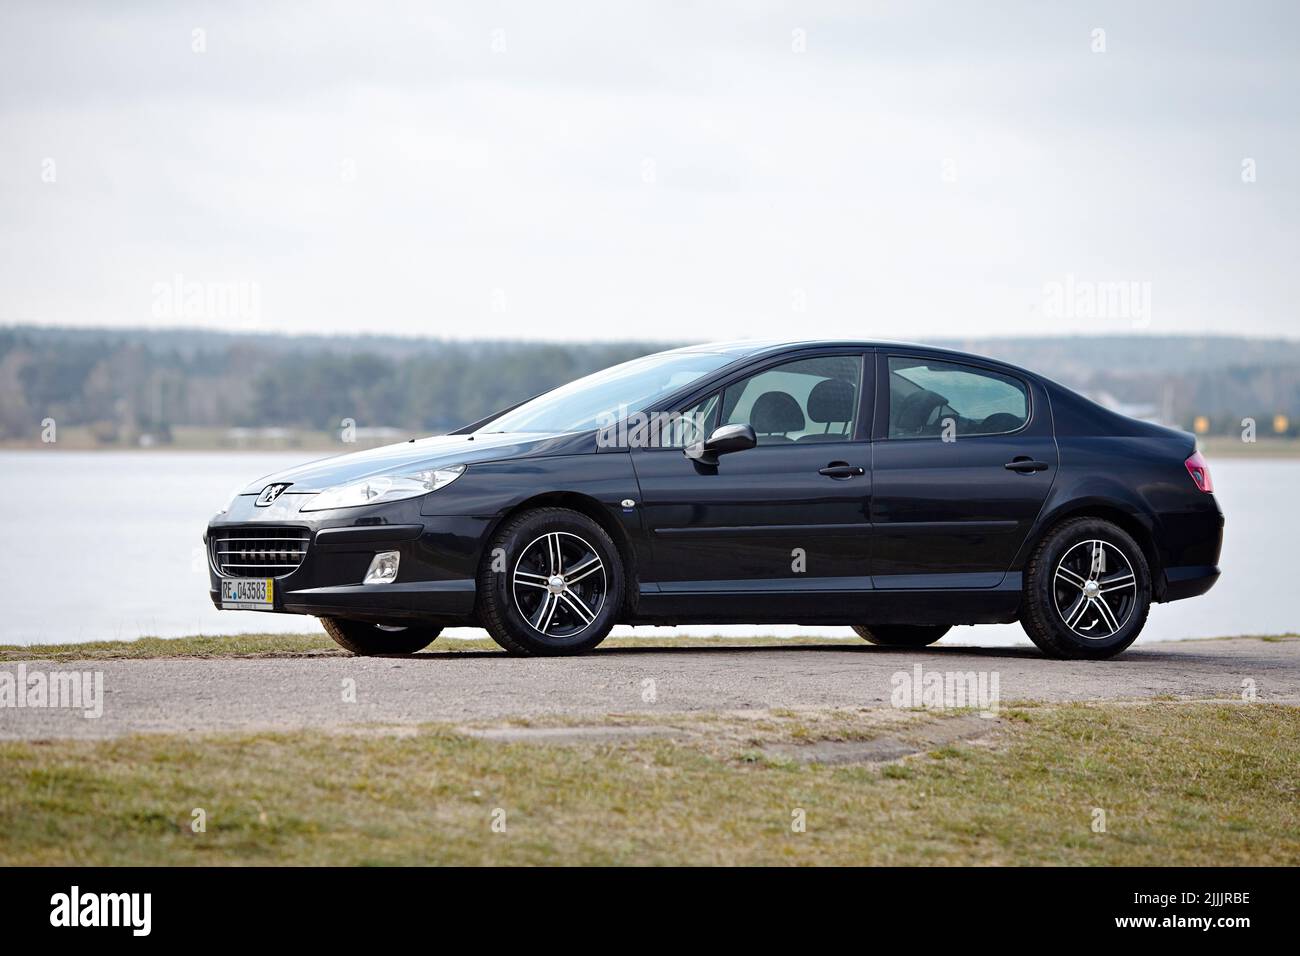 Berlin - April 2014: Peugeot 407 2003-2010 sedan pre facelift side view on  road outdoors with spring landscape background with lake and forest with  Stock Photo - Alamy